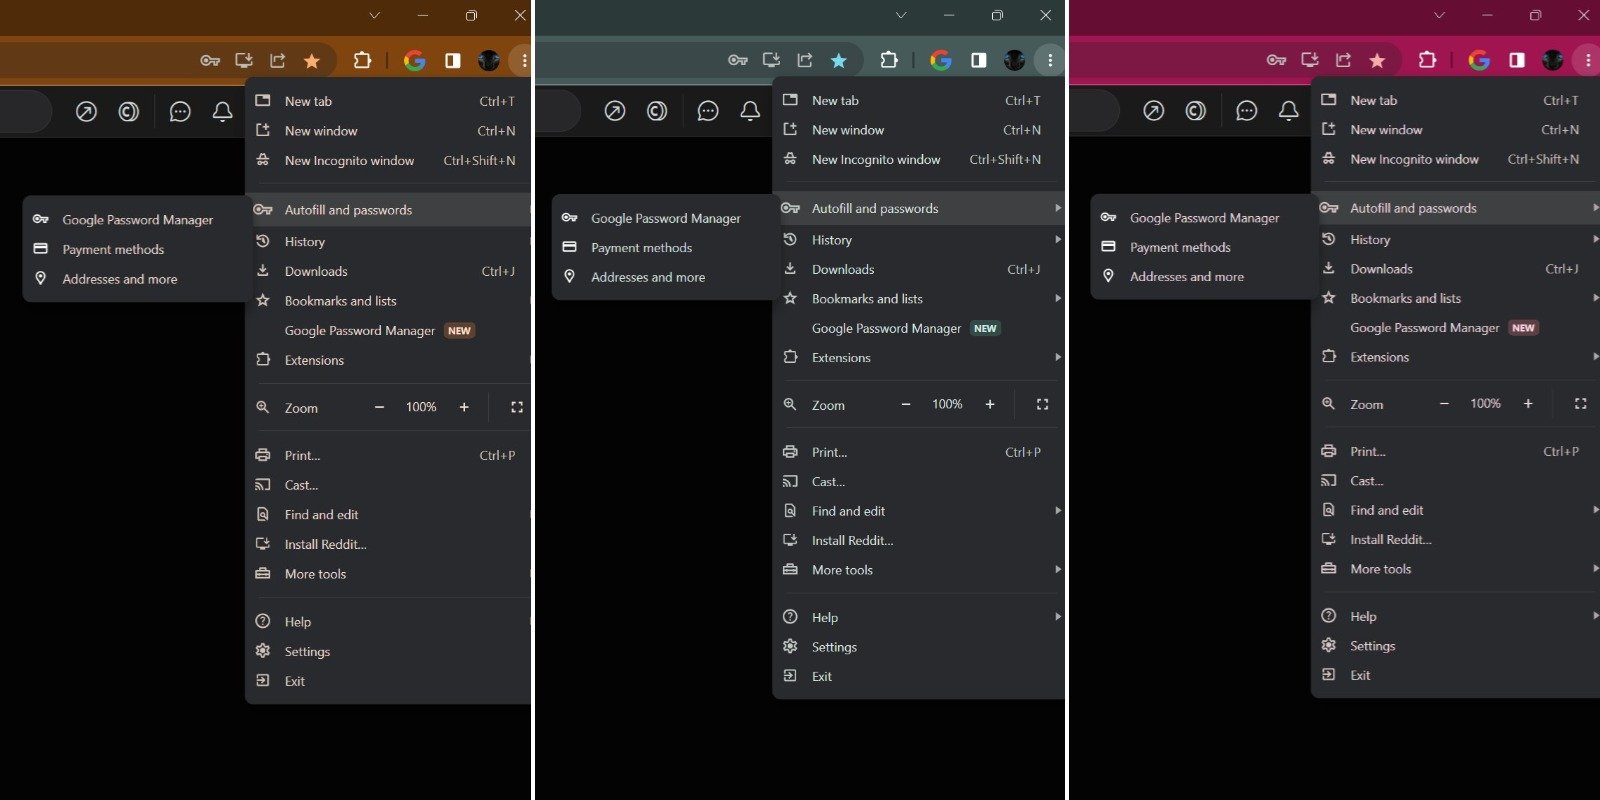 Dynamic themes will appear in Chrome on PC